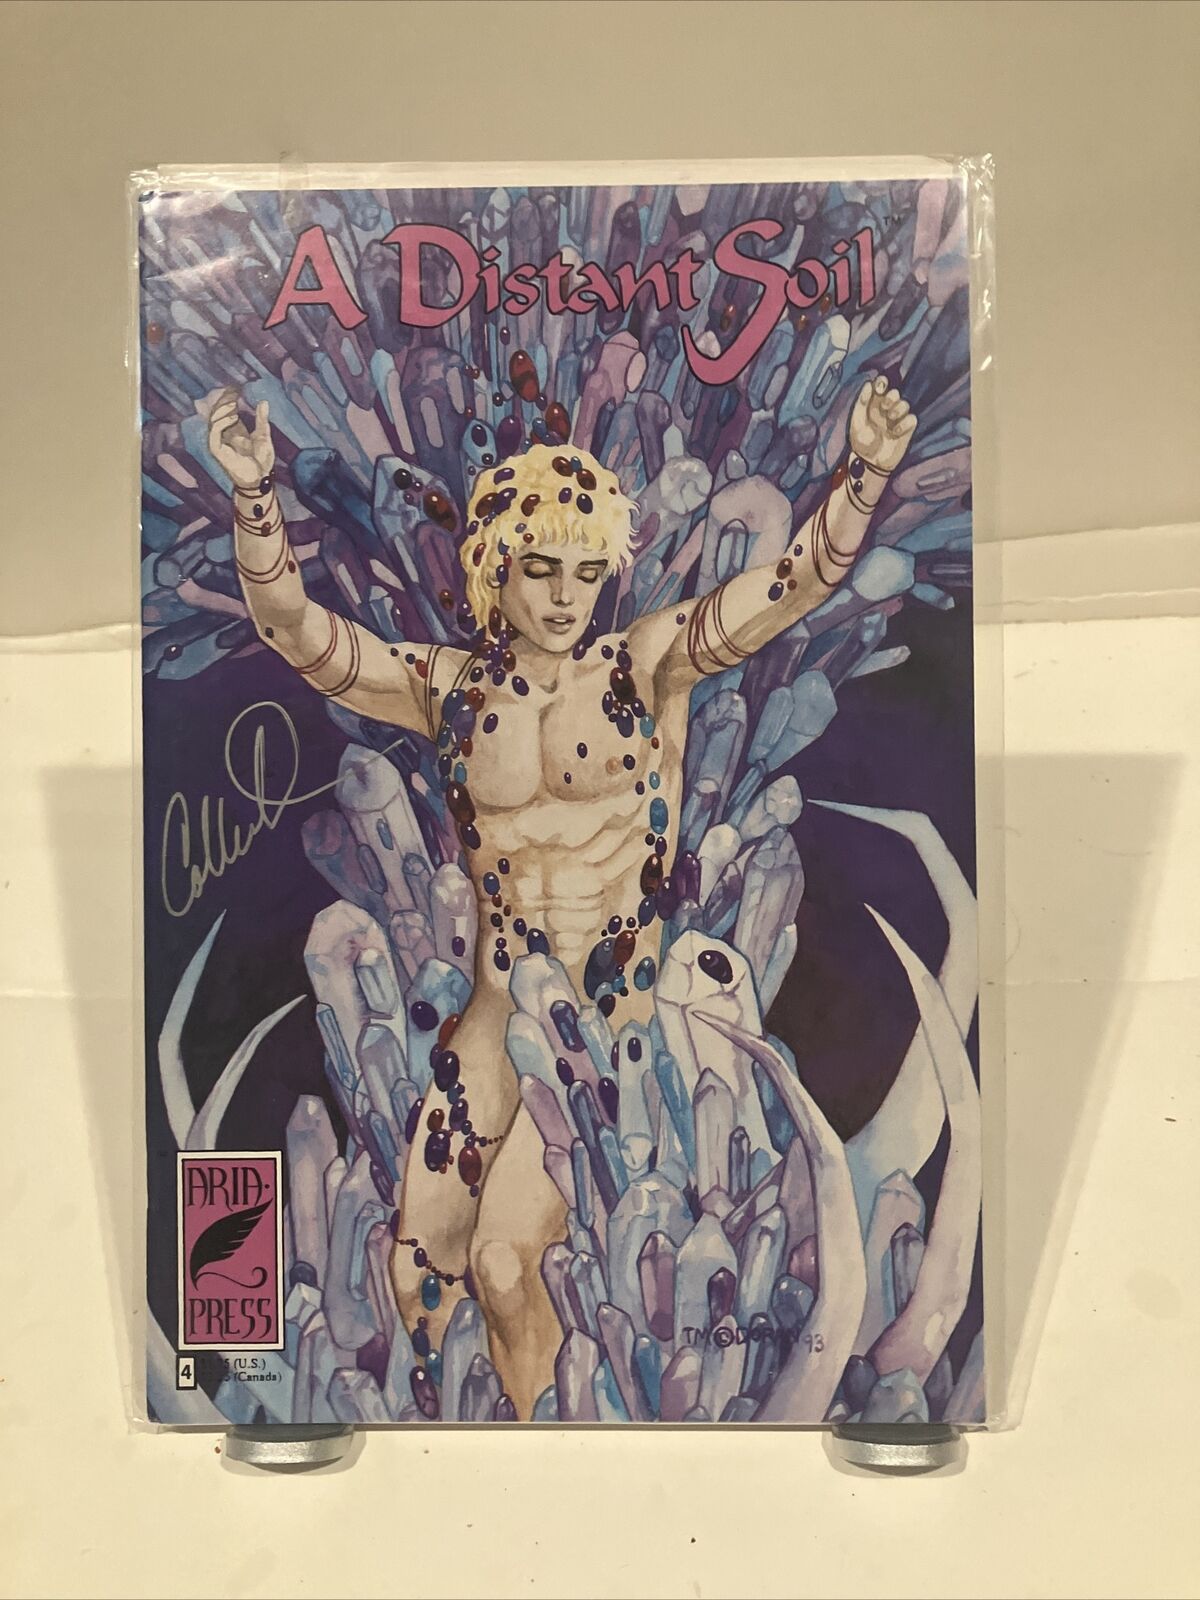 A DISTANT SOIL #4 (1993) Signed By Colleen Doran